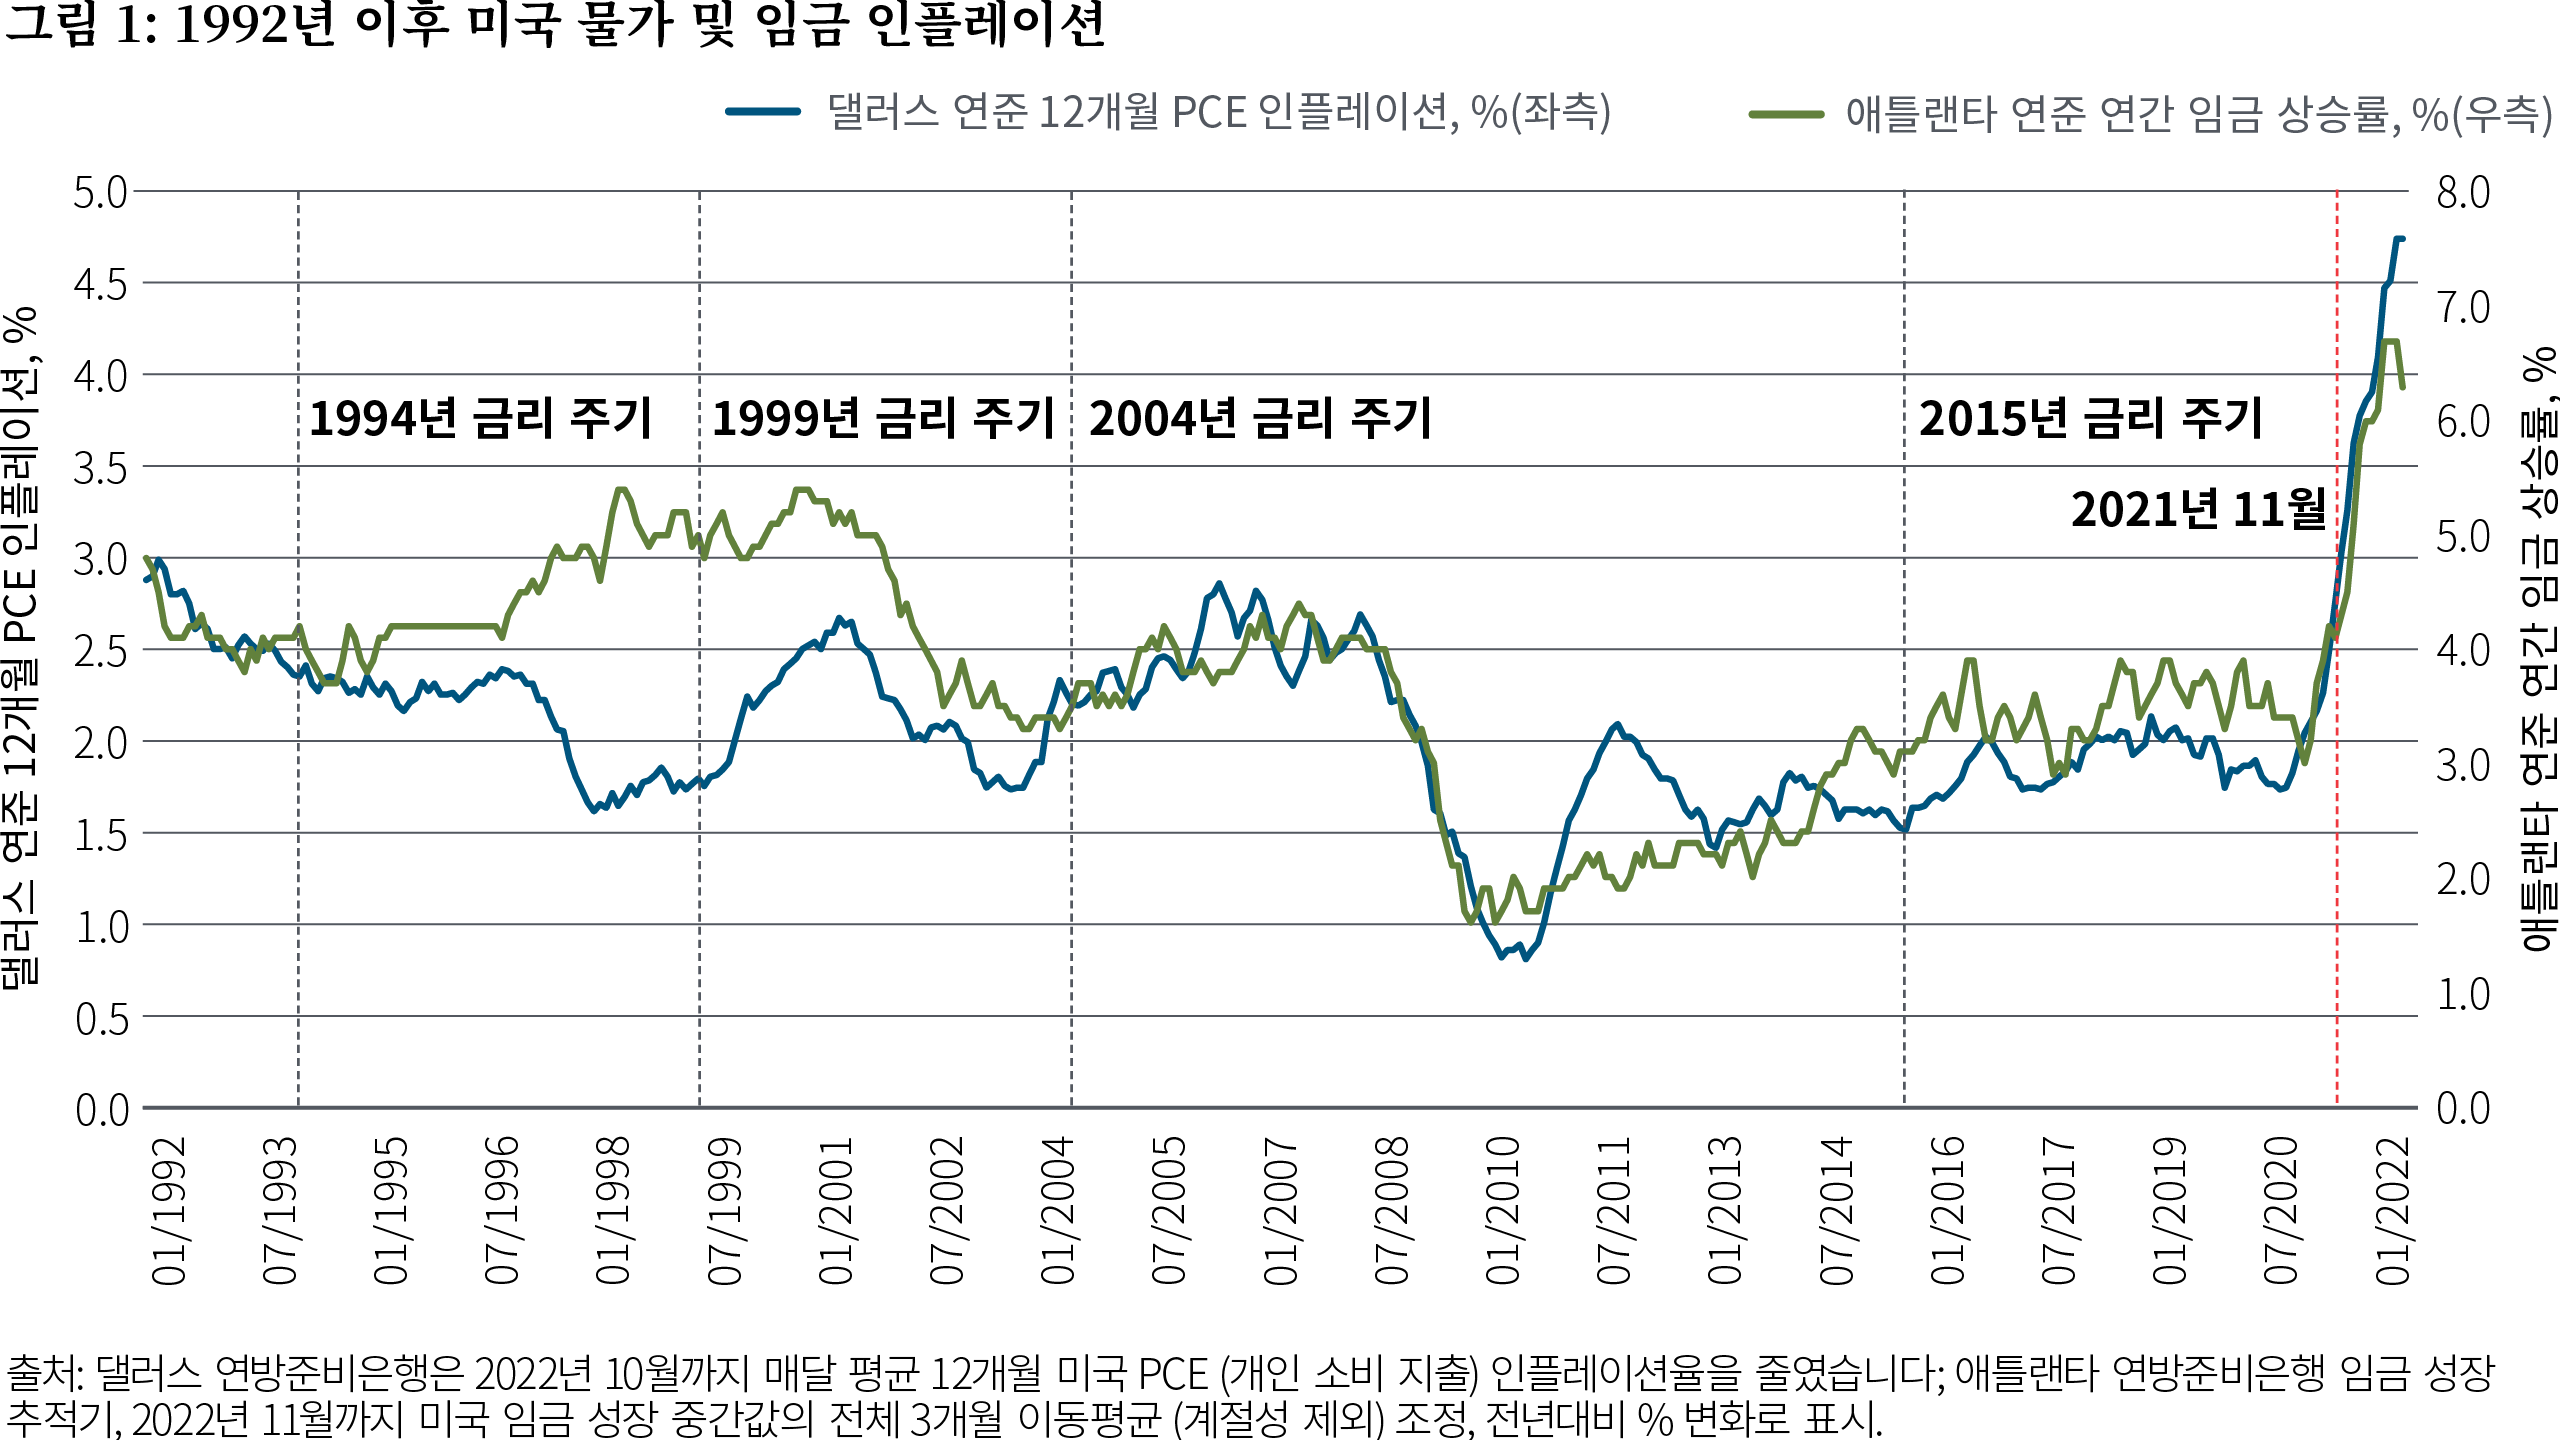 Figure 1 is a line chart depicting U.S. inflation (as measured by Personal Consumption Expenditures or PCE) and wage growth (as reported by the Federal Reserve Bank of Atlanta) since 1992. In that time, PCE fluctuated roughly between 1.5% and 3% (annualized) with the exception of a drop below 1% in 2010 in the aftermath of the global financial crisis and then the recent significant rise in PCE above 7% as of October 2022. Wage growth fluctuated generally between 2% and 5% annualized but recently reached a high for this time frame of 6.7% in July 2022 before dropping slightly to 6.3% as of November.